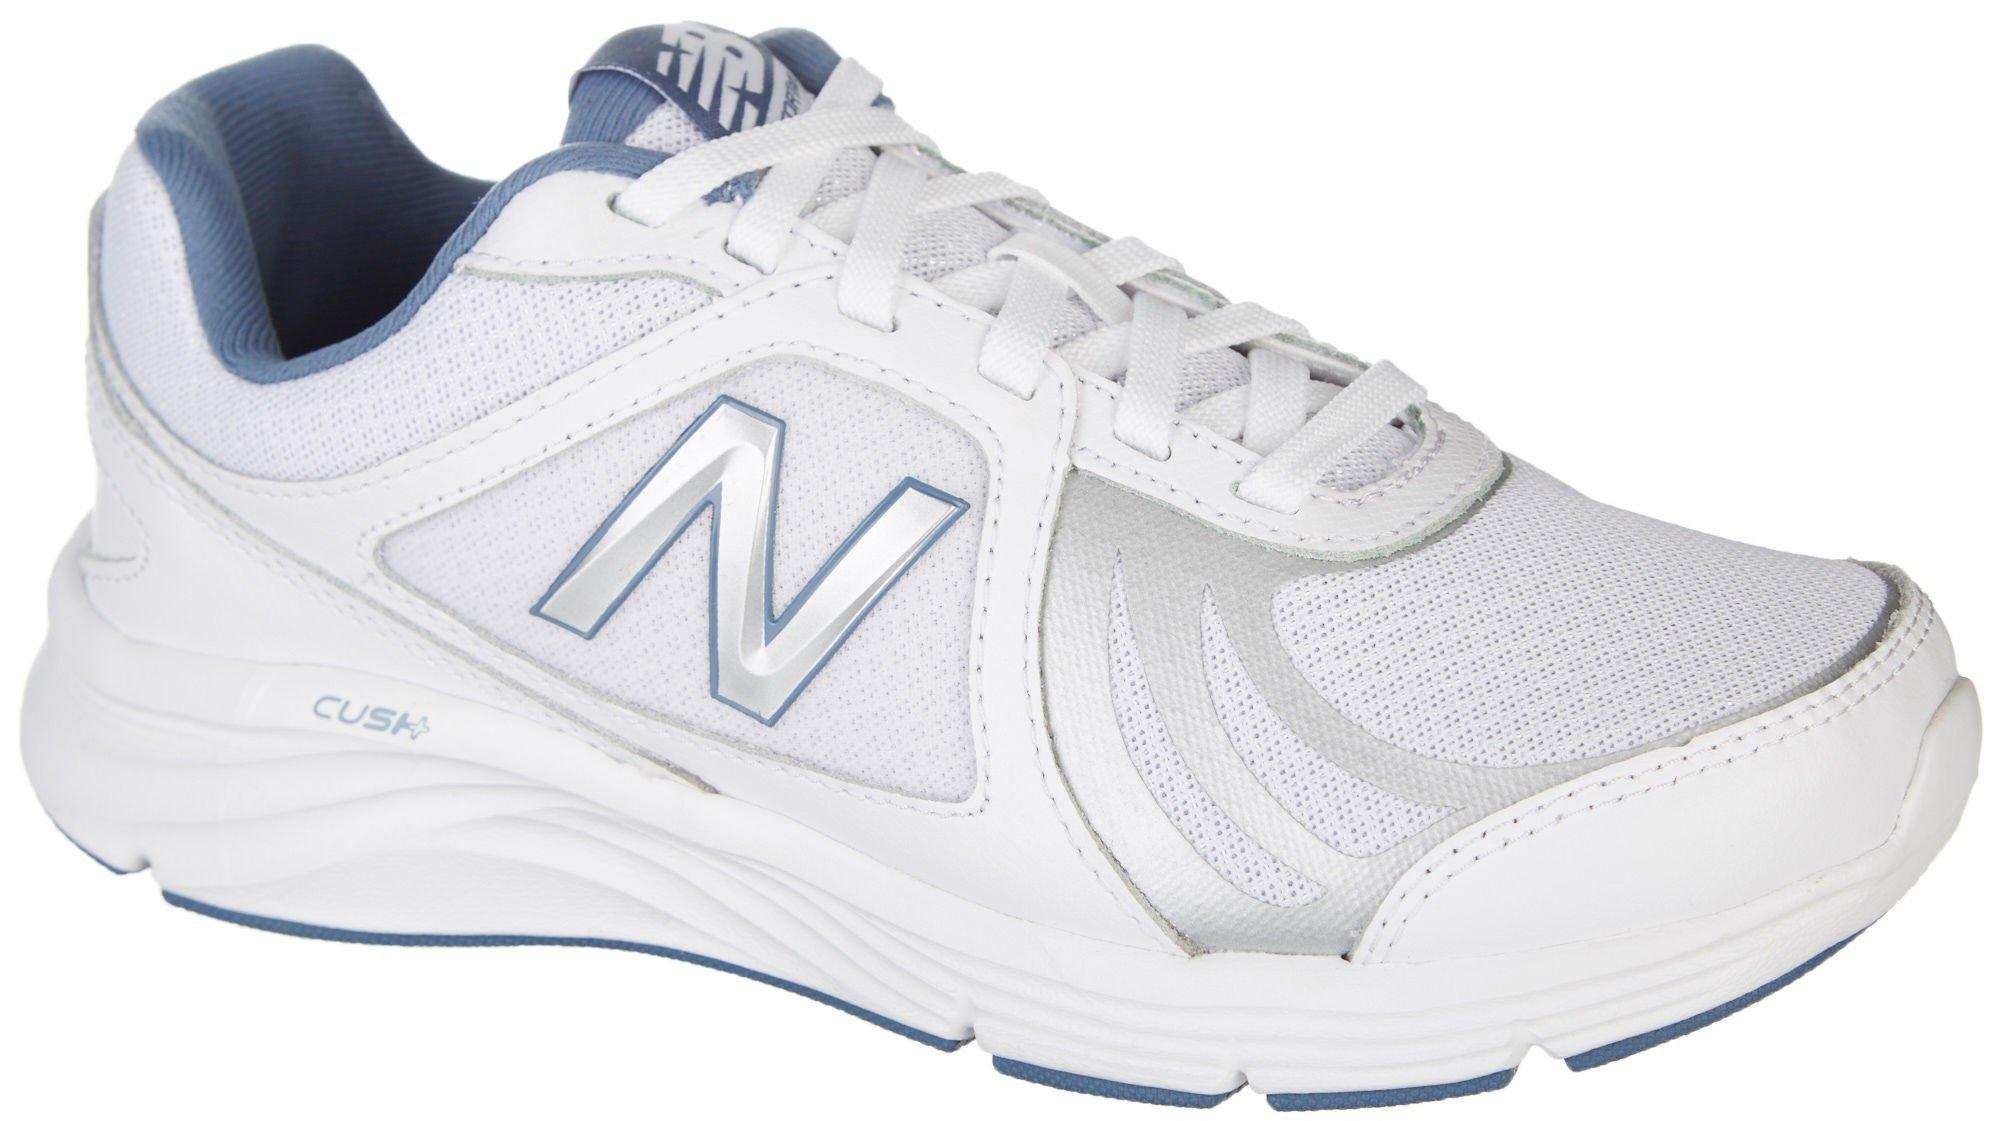 New Balance Comfortable Athletic Shoes 